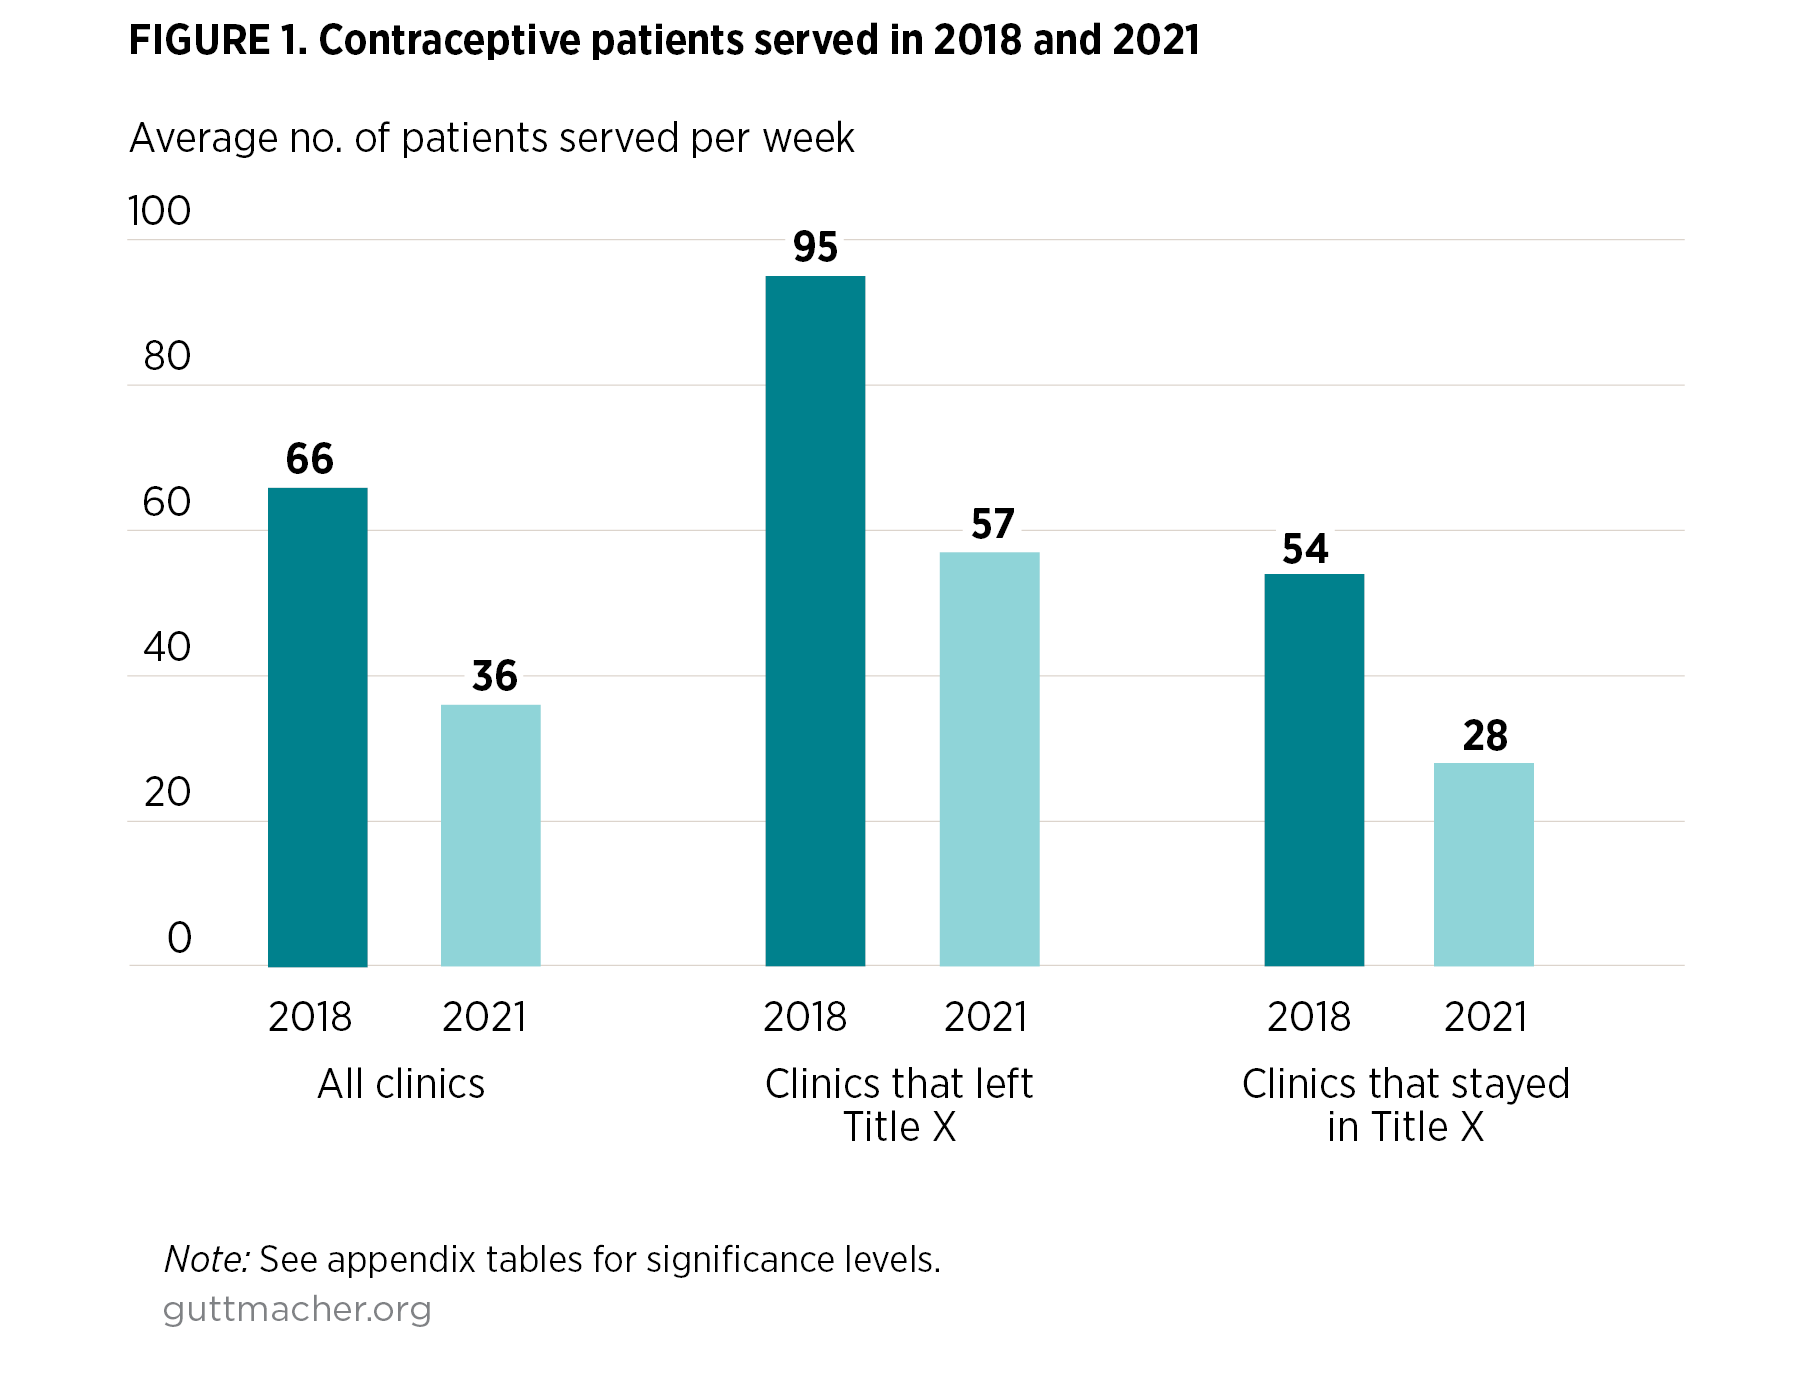 Bar chart showing Contraceptive patients served in 2018 and 2021